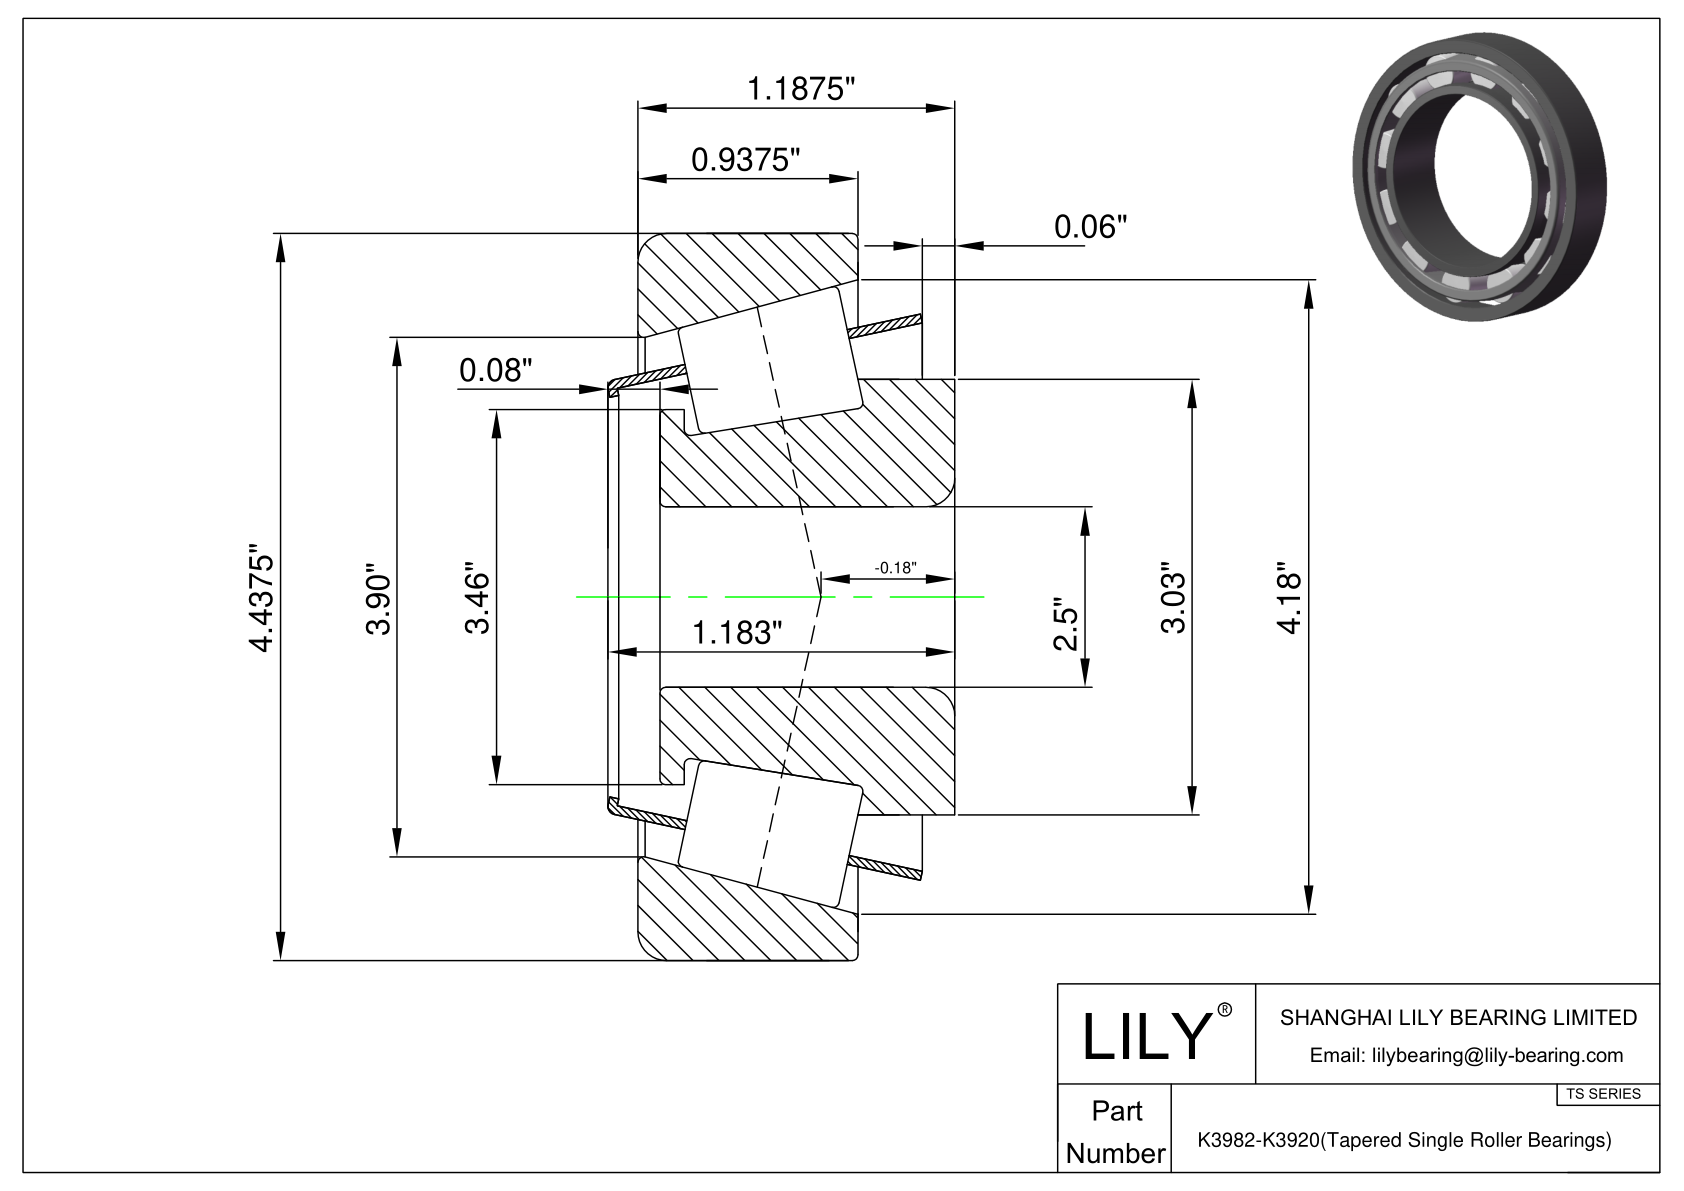 K3982-K3920 TS (Tapered Single Roller Bearings) (Imperial) cad drawing